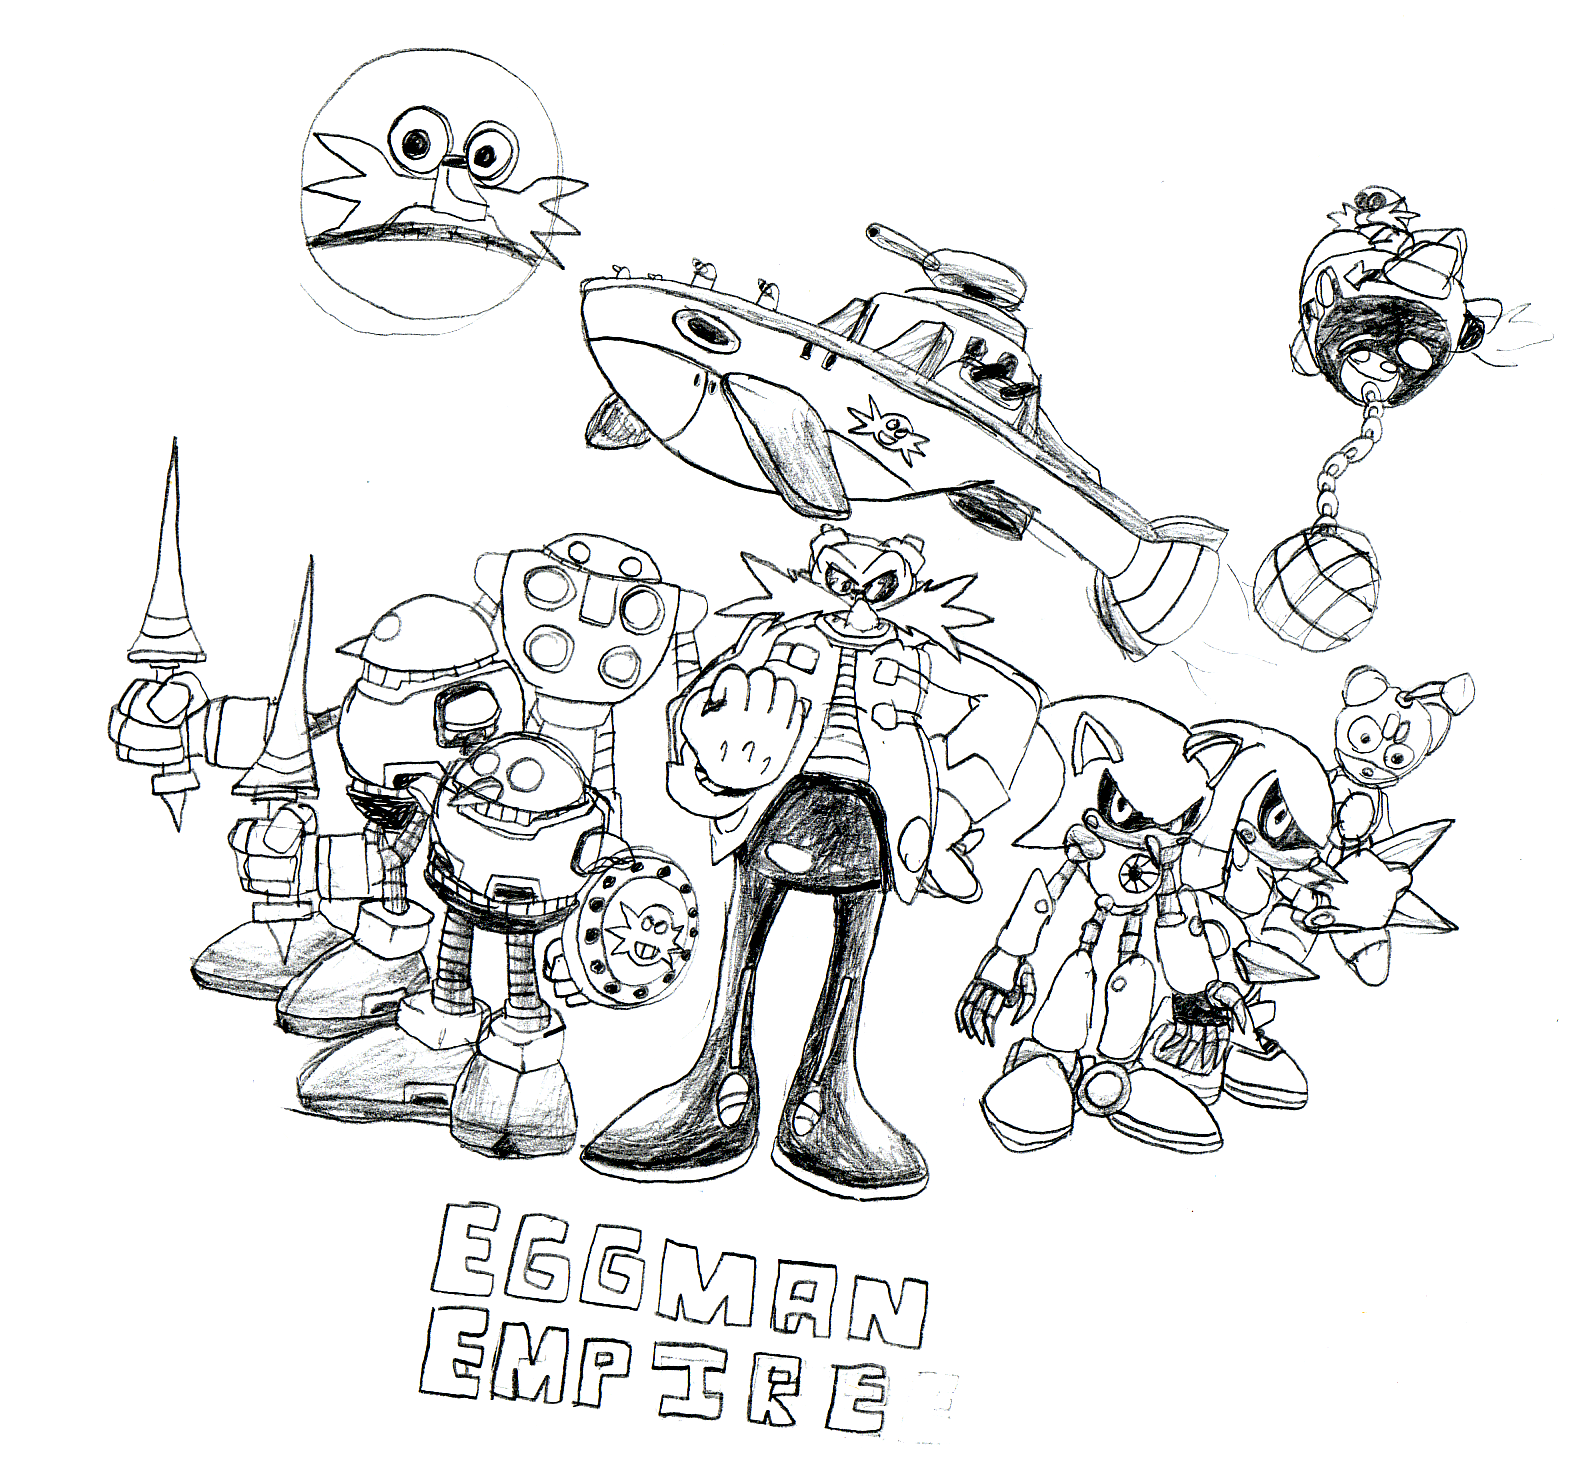 Eggman_Empire_by_SRB2_Blade.png